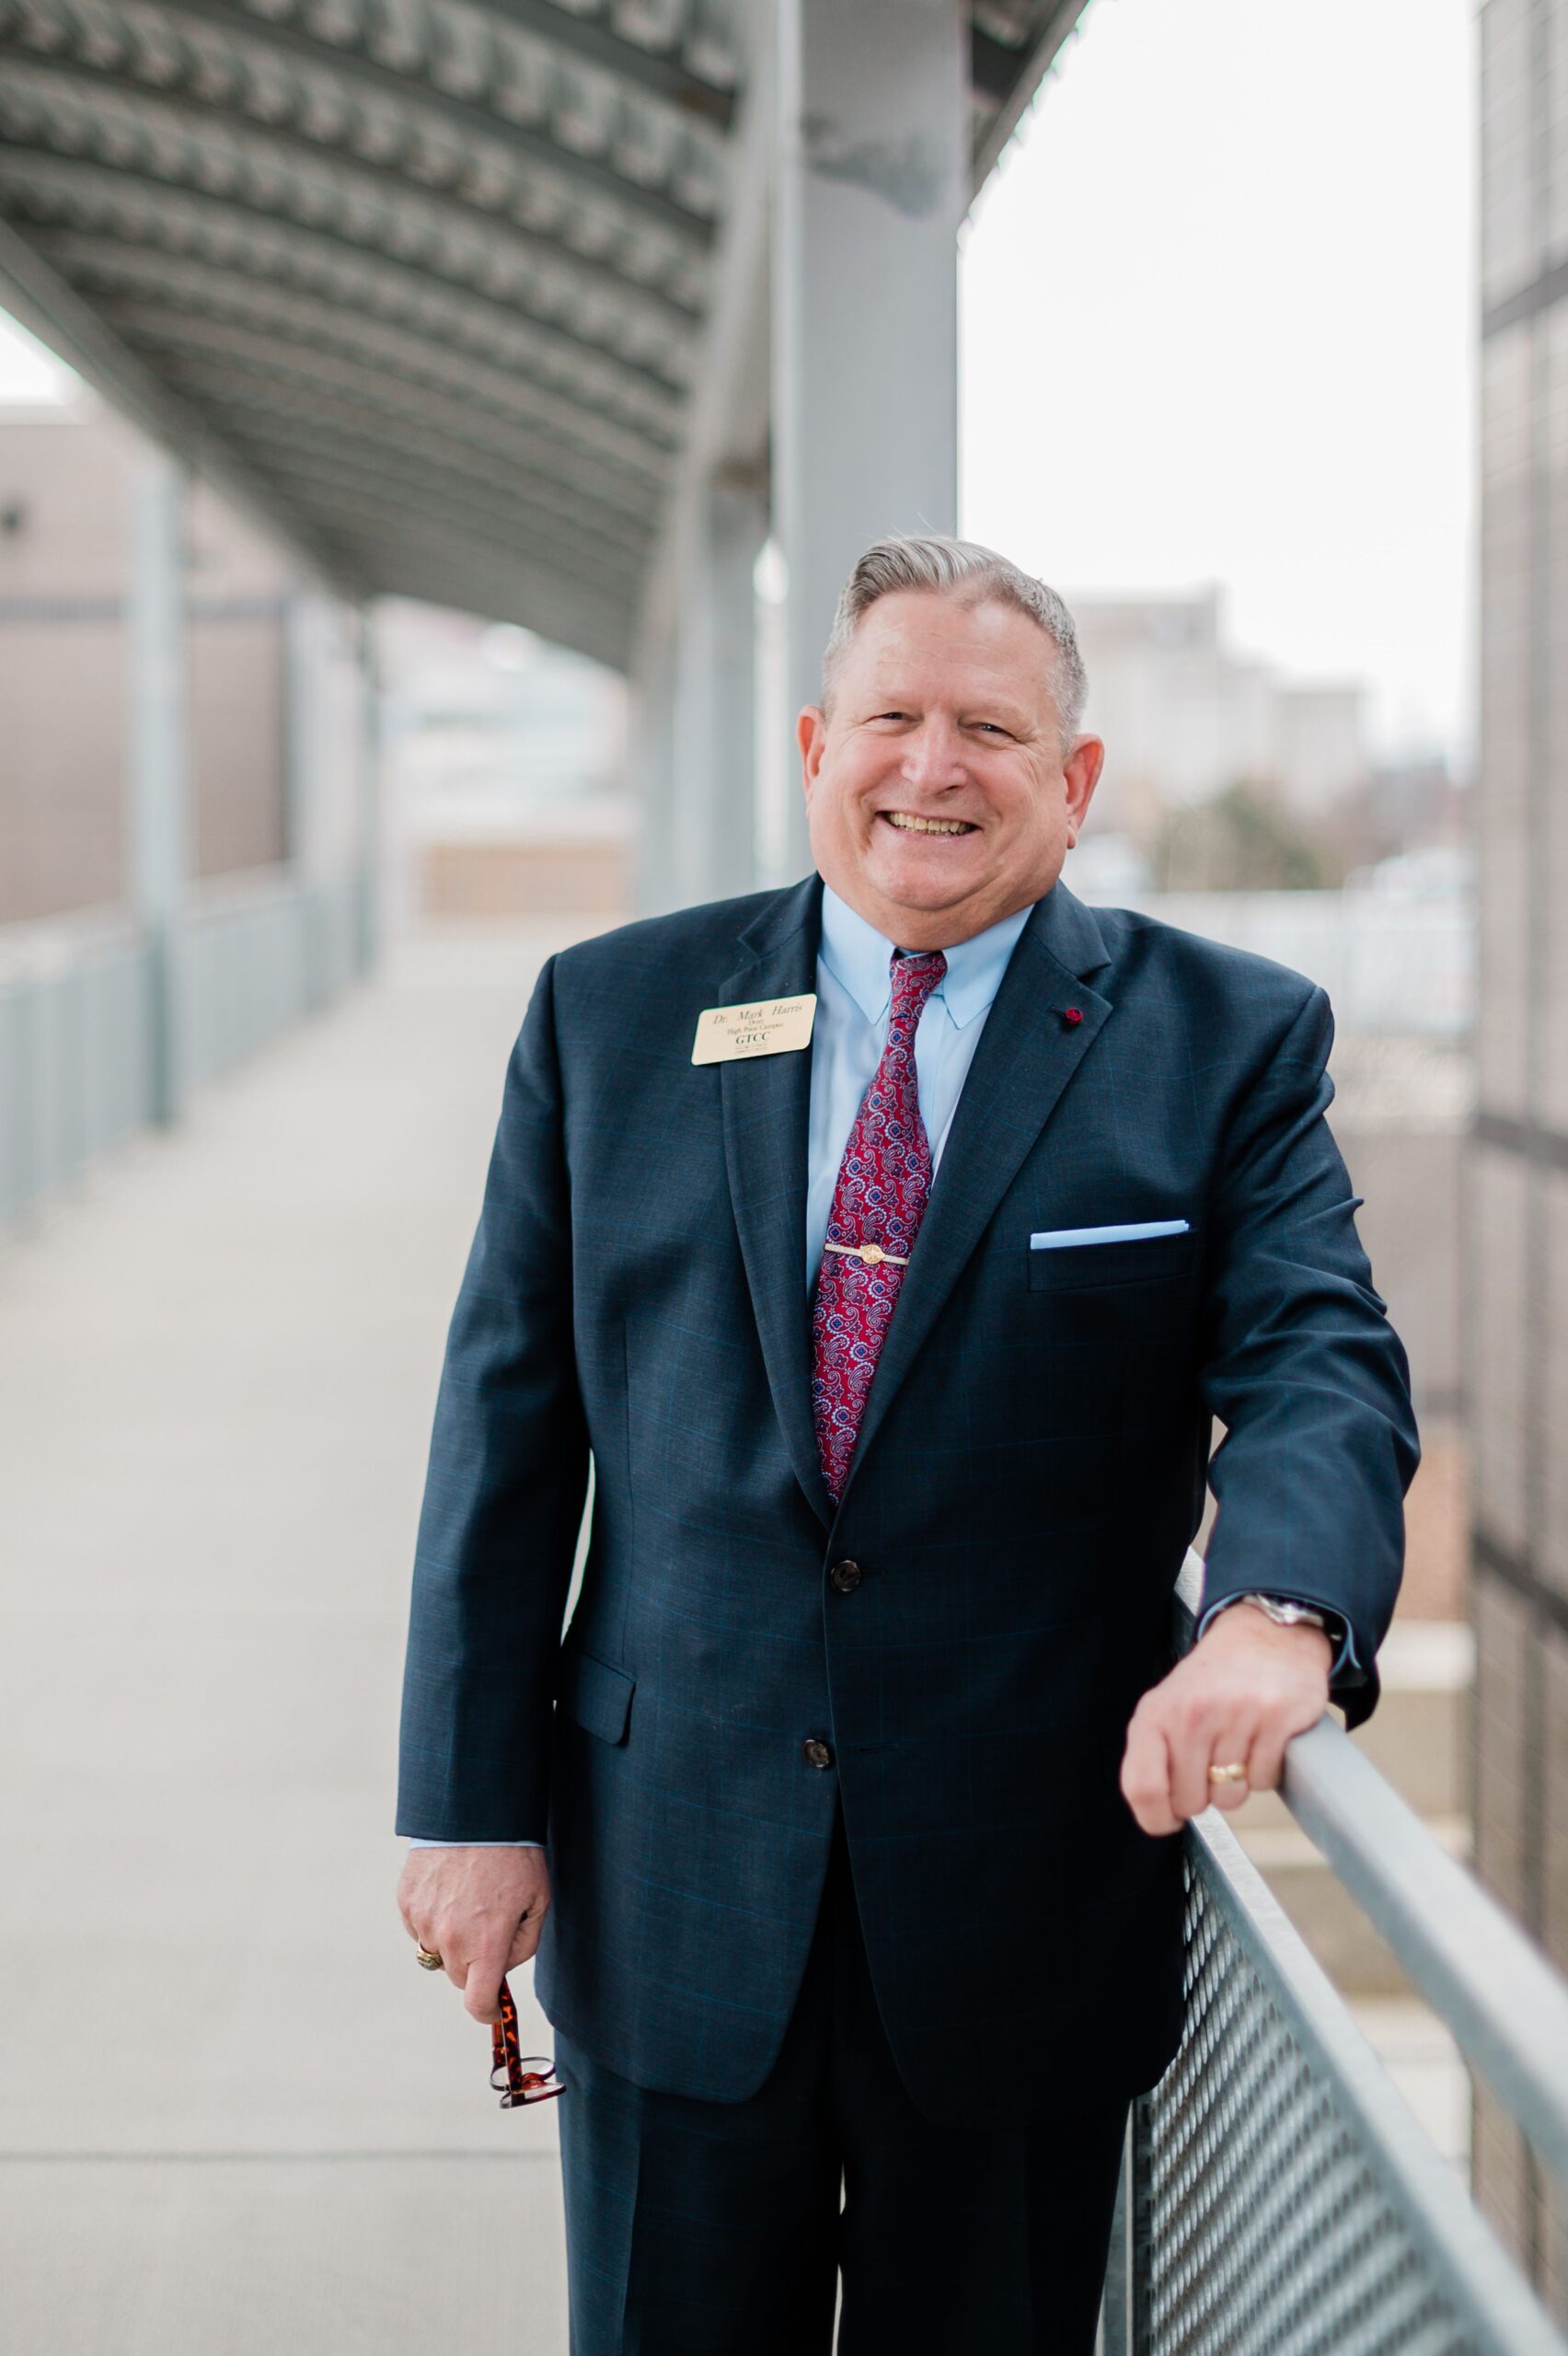 Dr. Mark Harris, Dean at Guilford Technical Community College, High Point campus, stands on the walkway in High Point, NC.